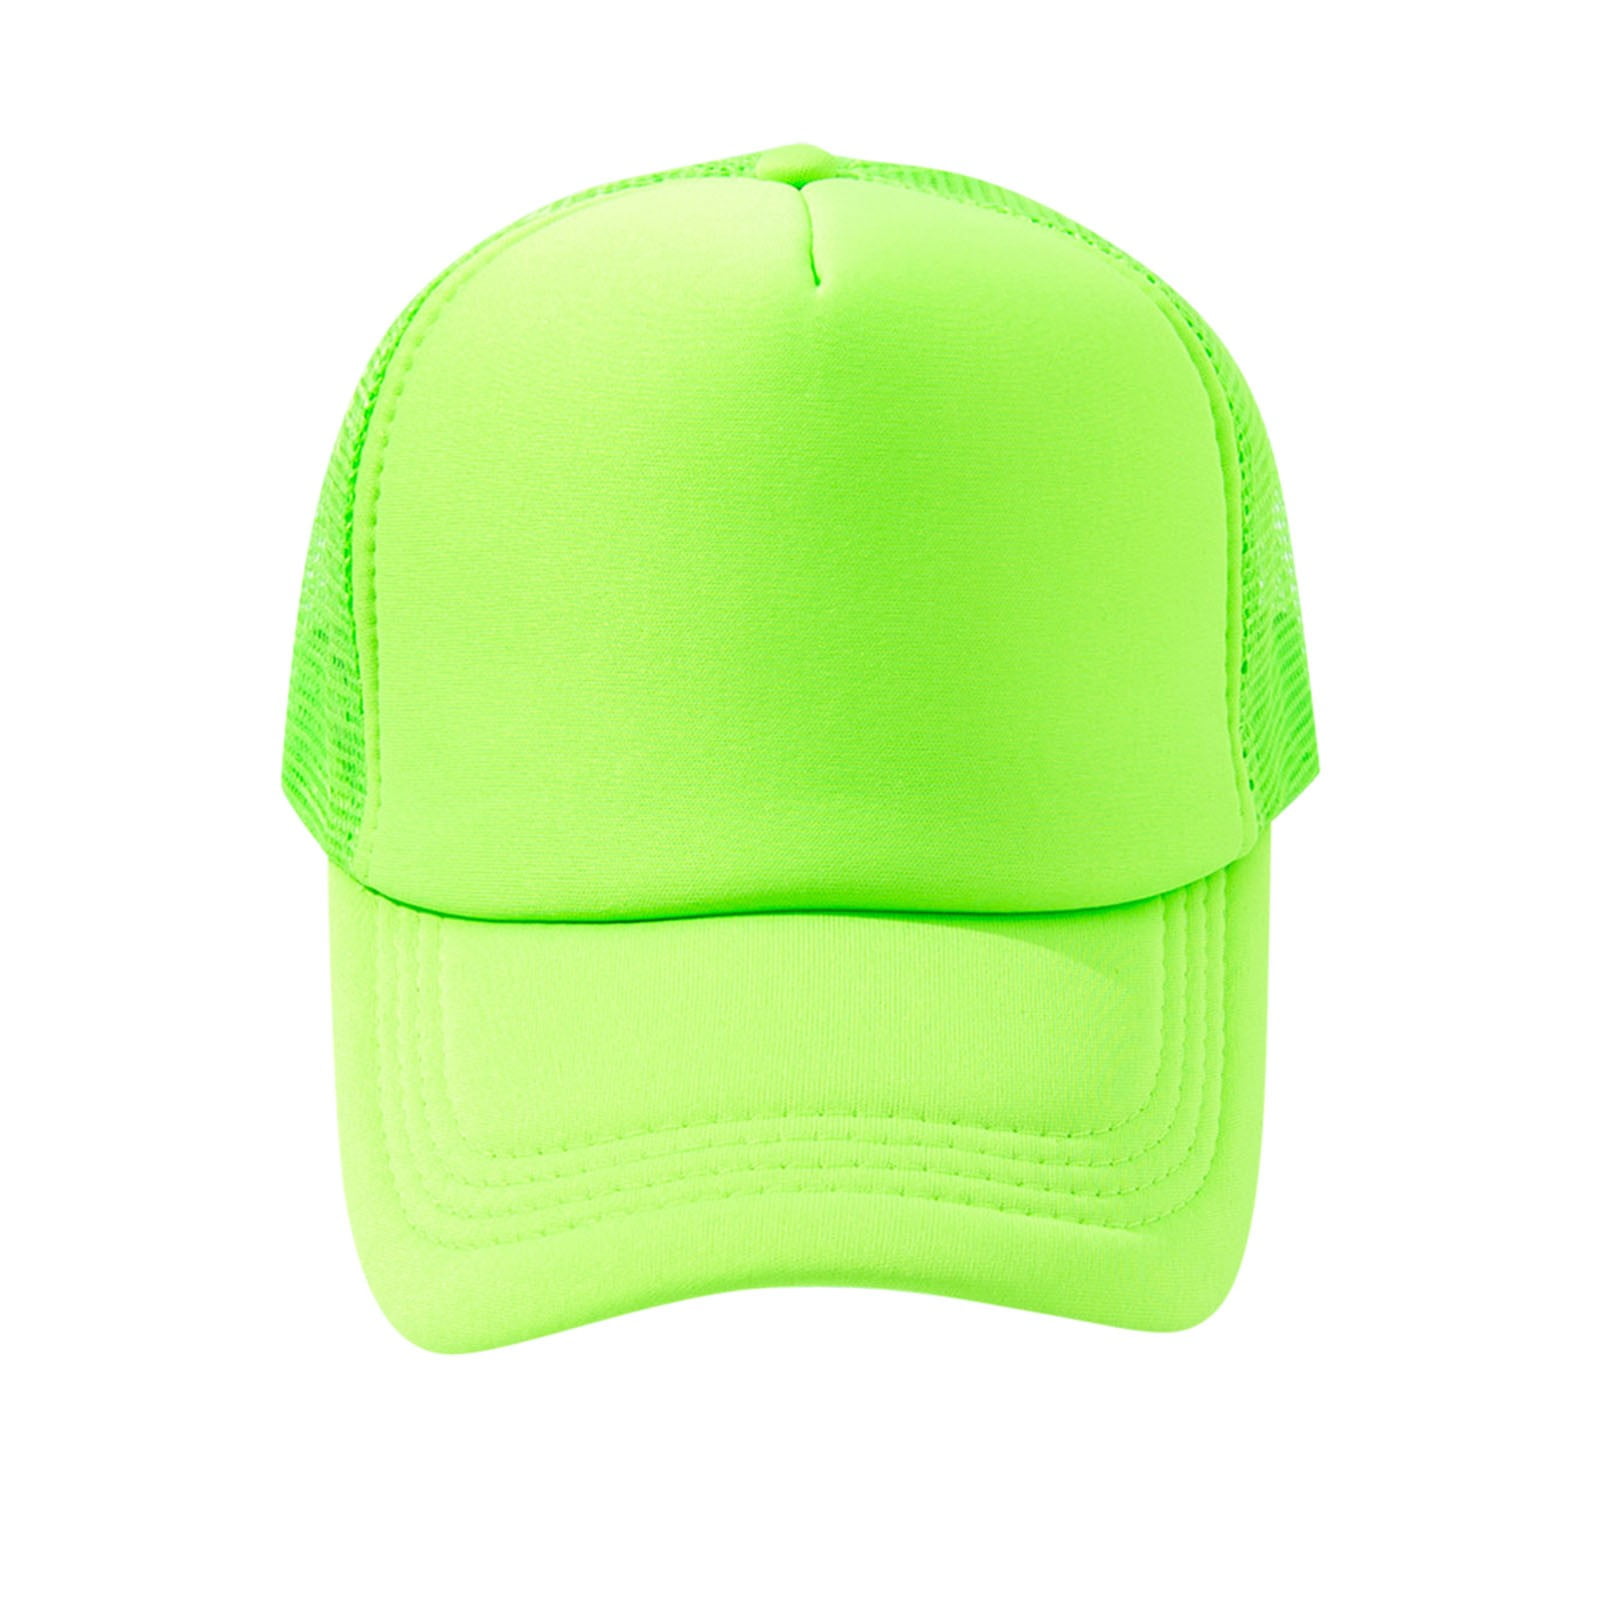 Sukeen Cooling Performance Hat - Cooling Hats for Men Women - Lightweight  Quick Dry Sun Hats, Adjustable Fit, Green